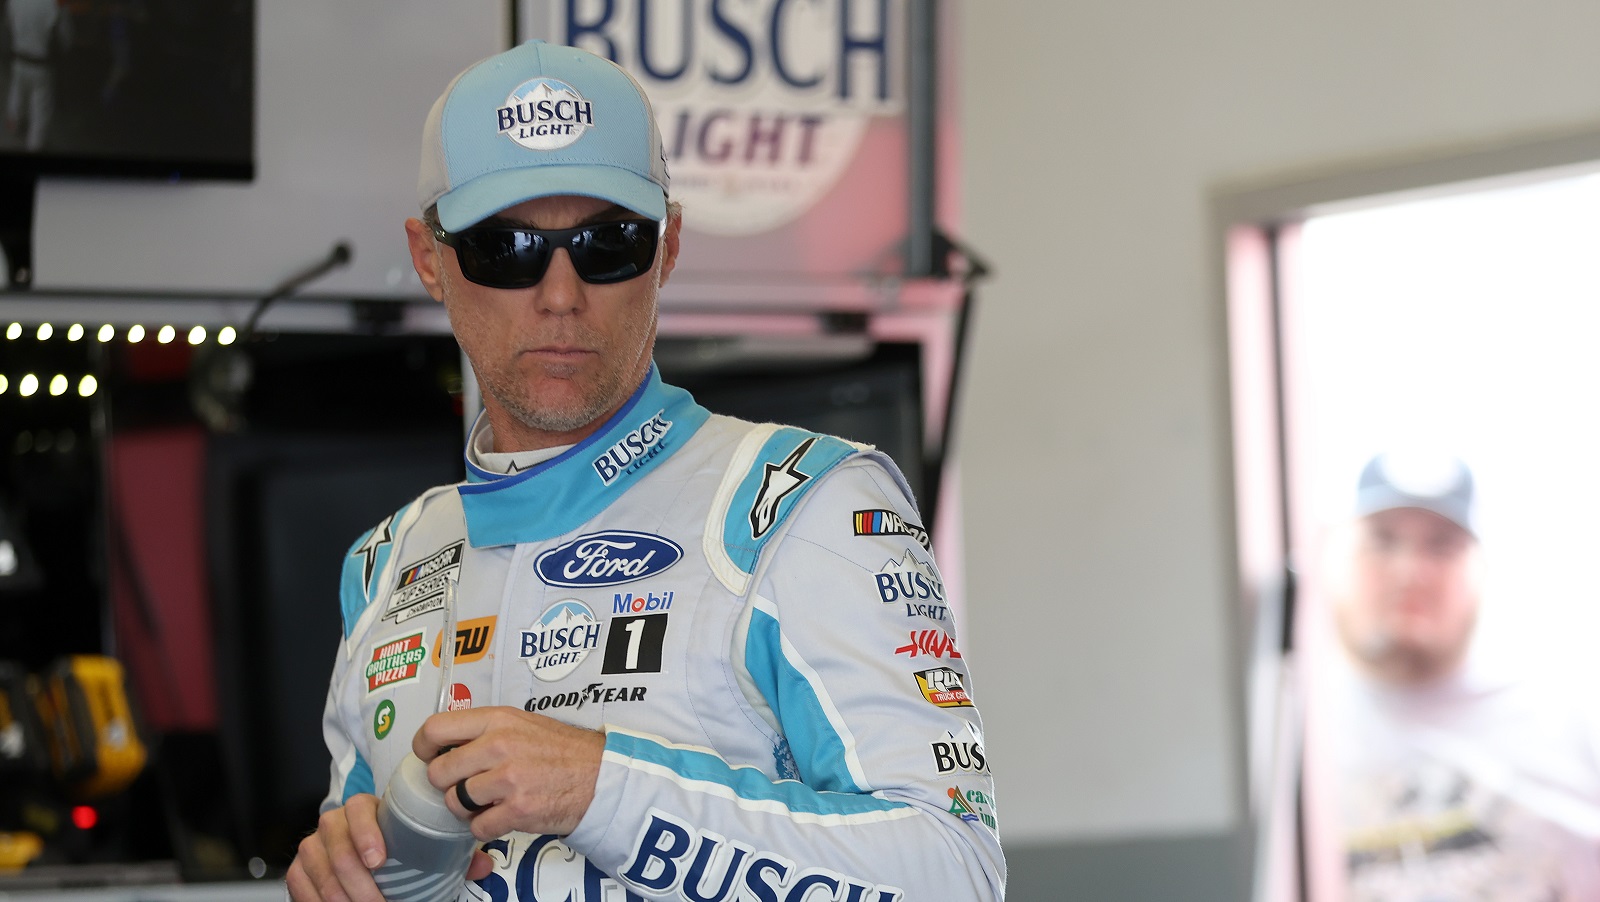 Kevin Harvick, driver of the No. 4 Ford, waits in the garage area during practice for the NASCAR Cup Series Daytona 500 at Daytona International Speedway on Feb. 18, 2022.